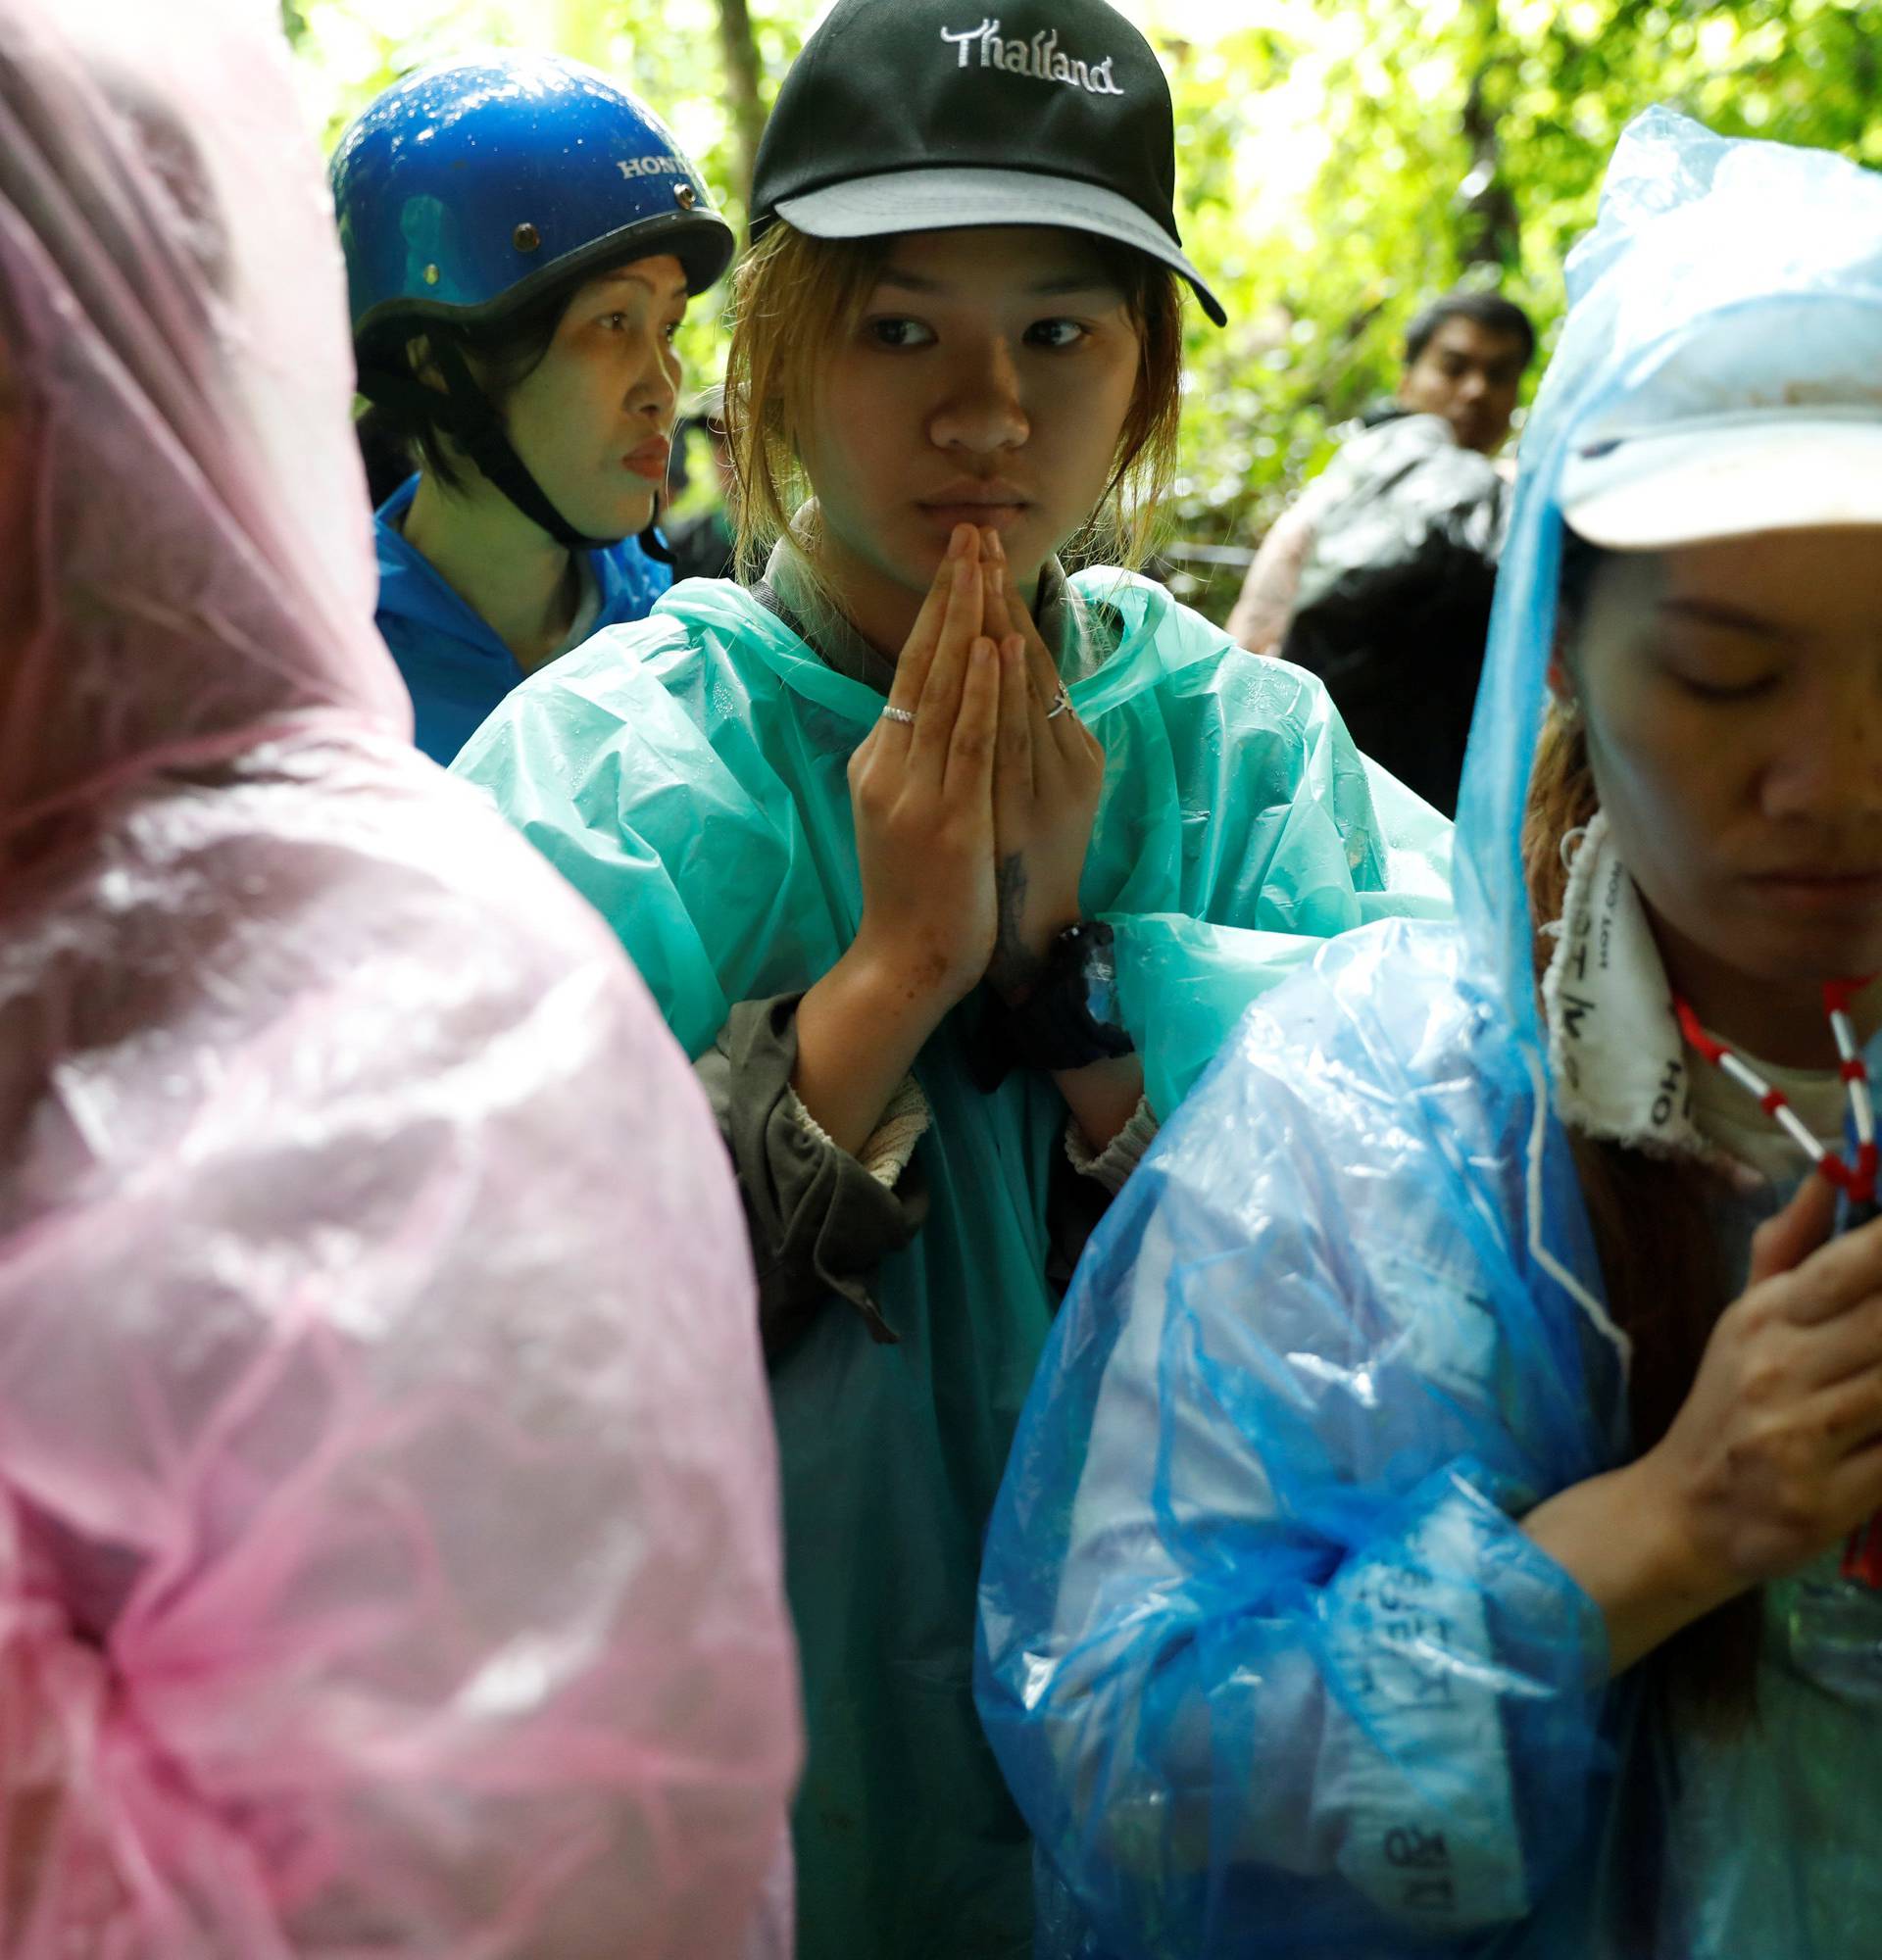 Family members pray near Tham Luang caves during a search for 12 members of an under-16 soccer team and their coach, in the northern province of Chiang Rai